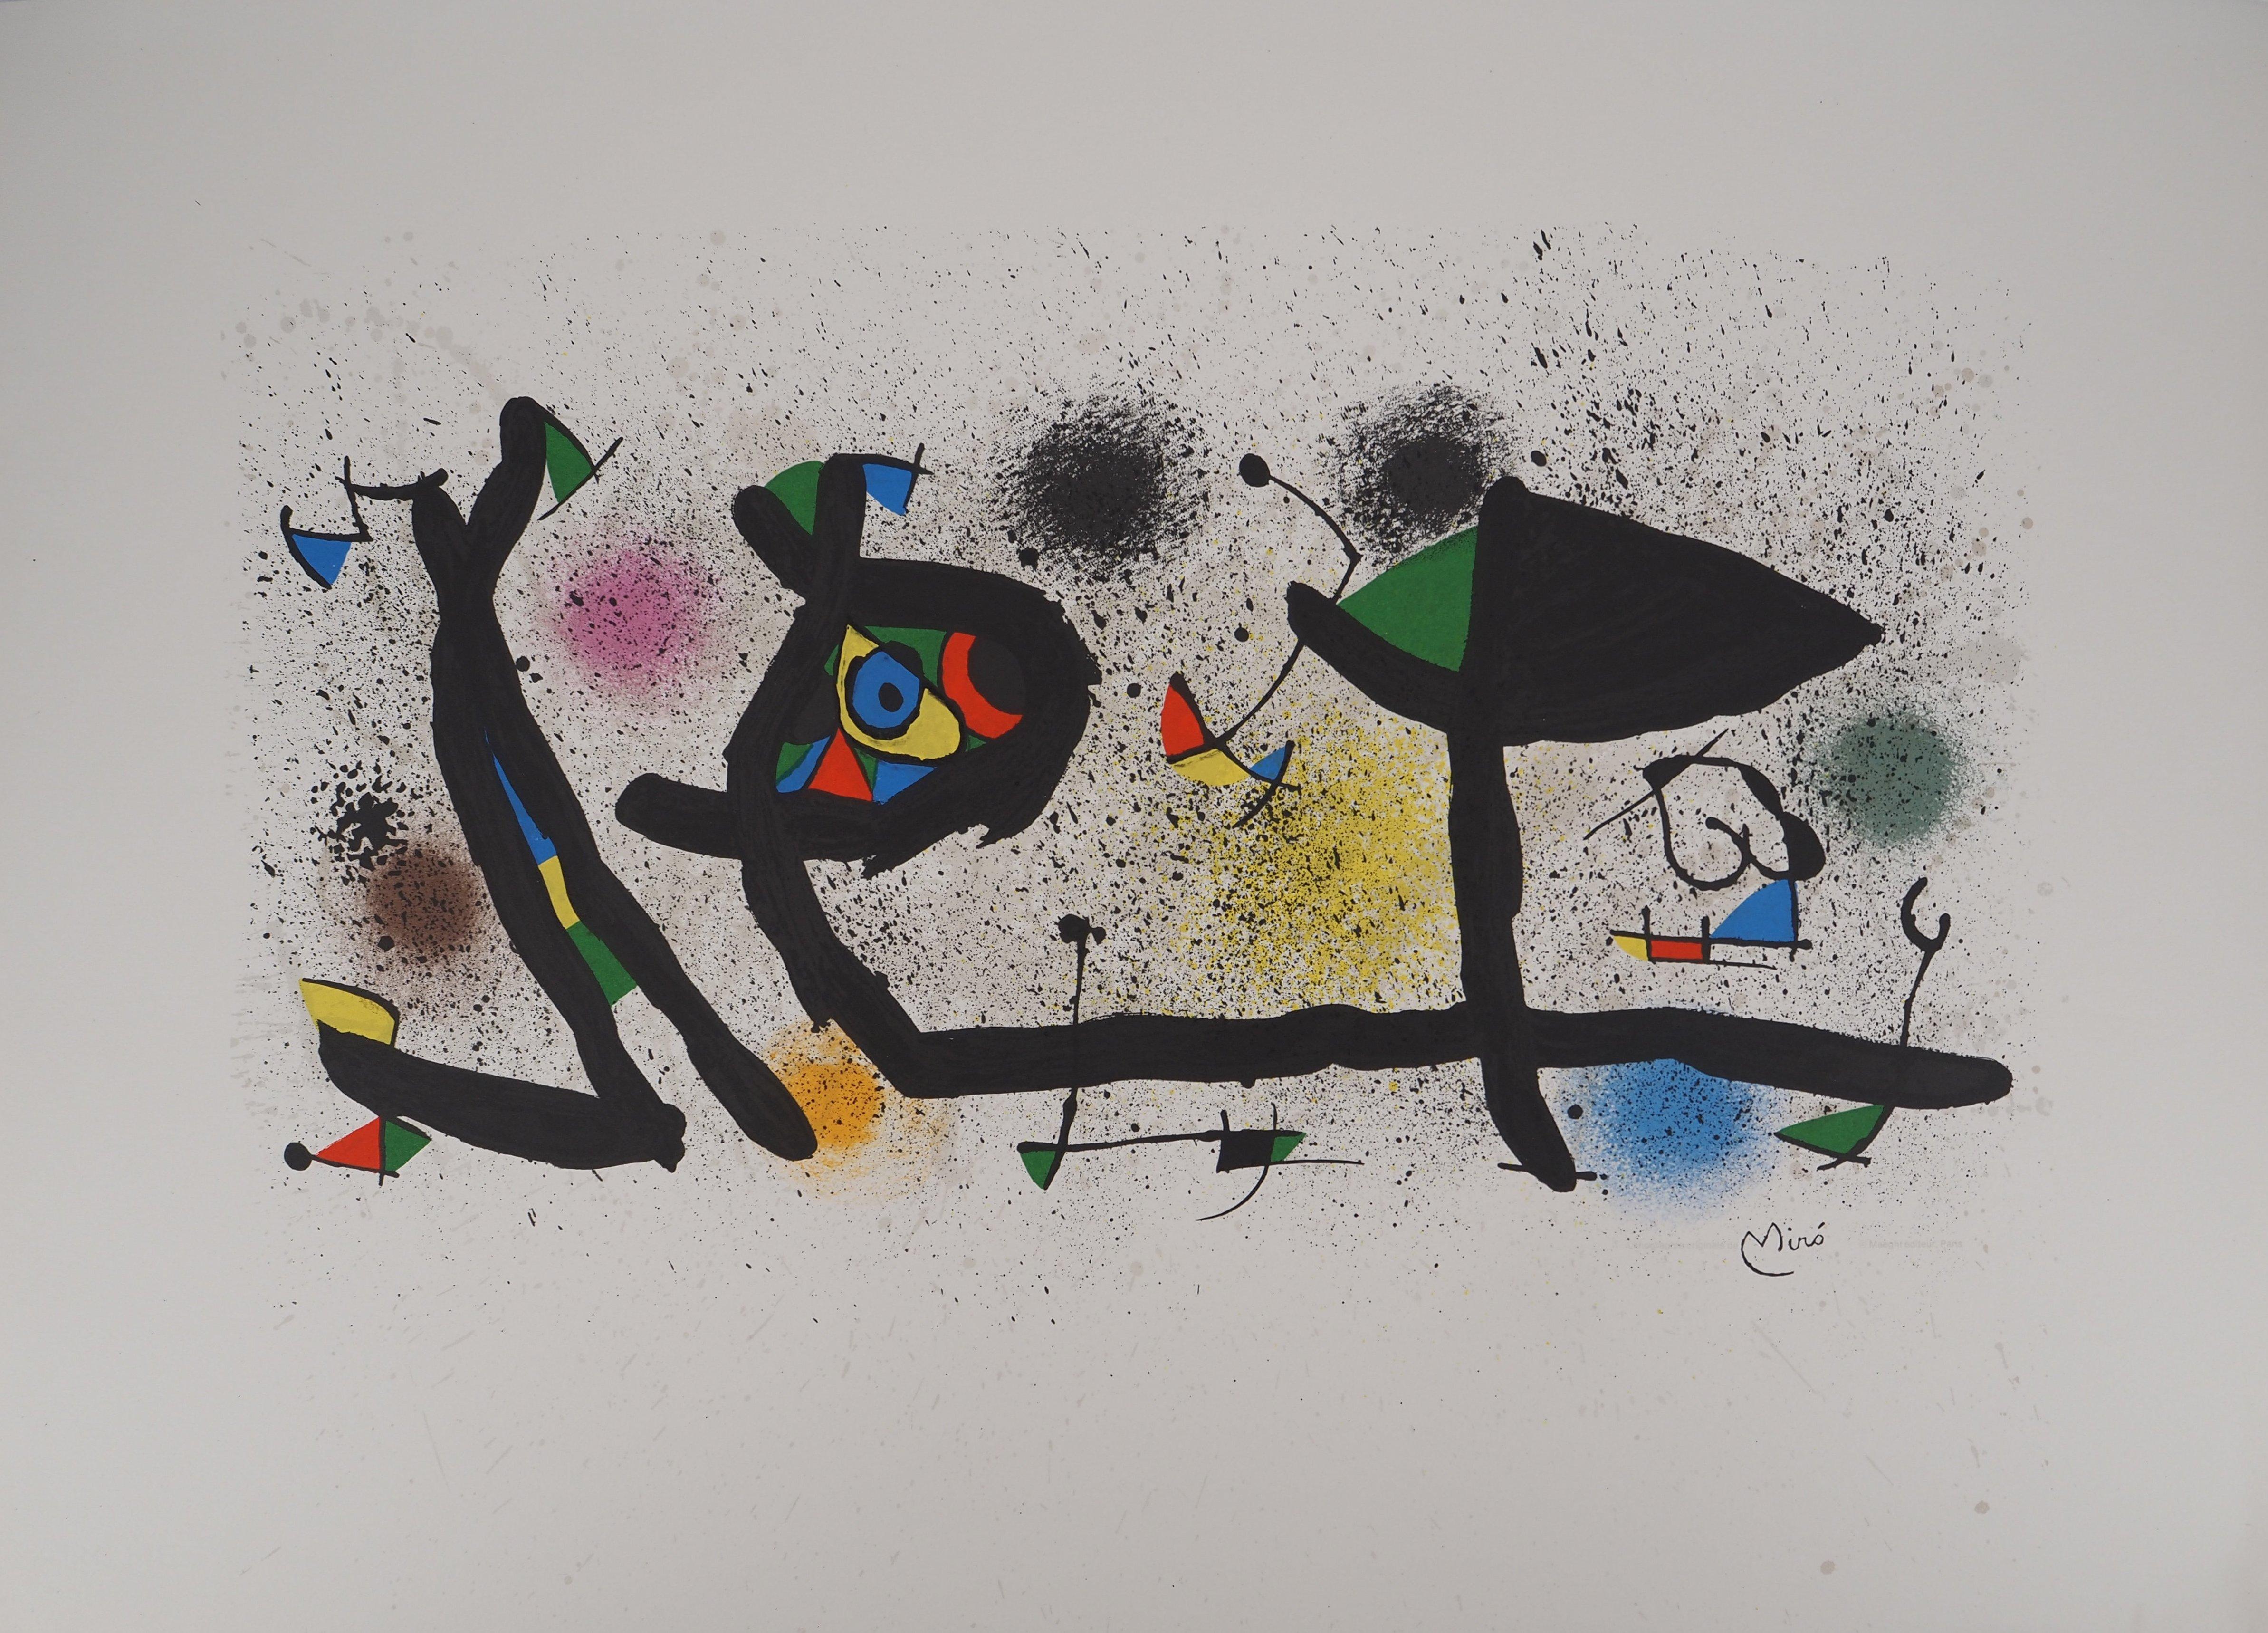 Joan Miró Abstract Print - Surrealist Garden - Original Lithograph, Signed in the Plate - Mourlot 950